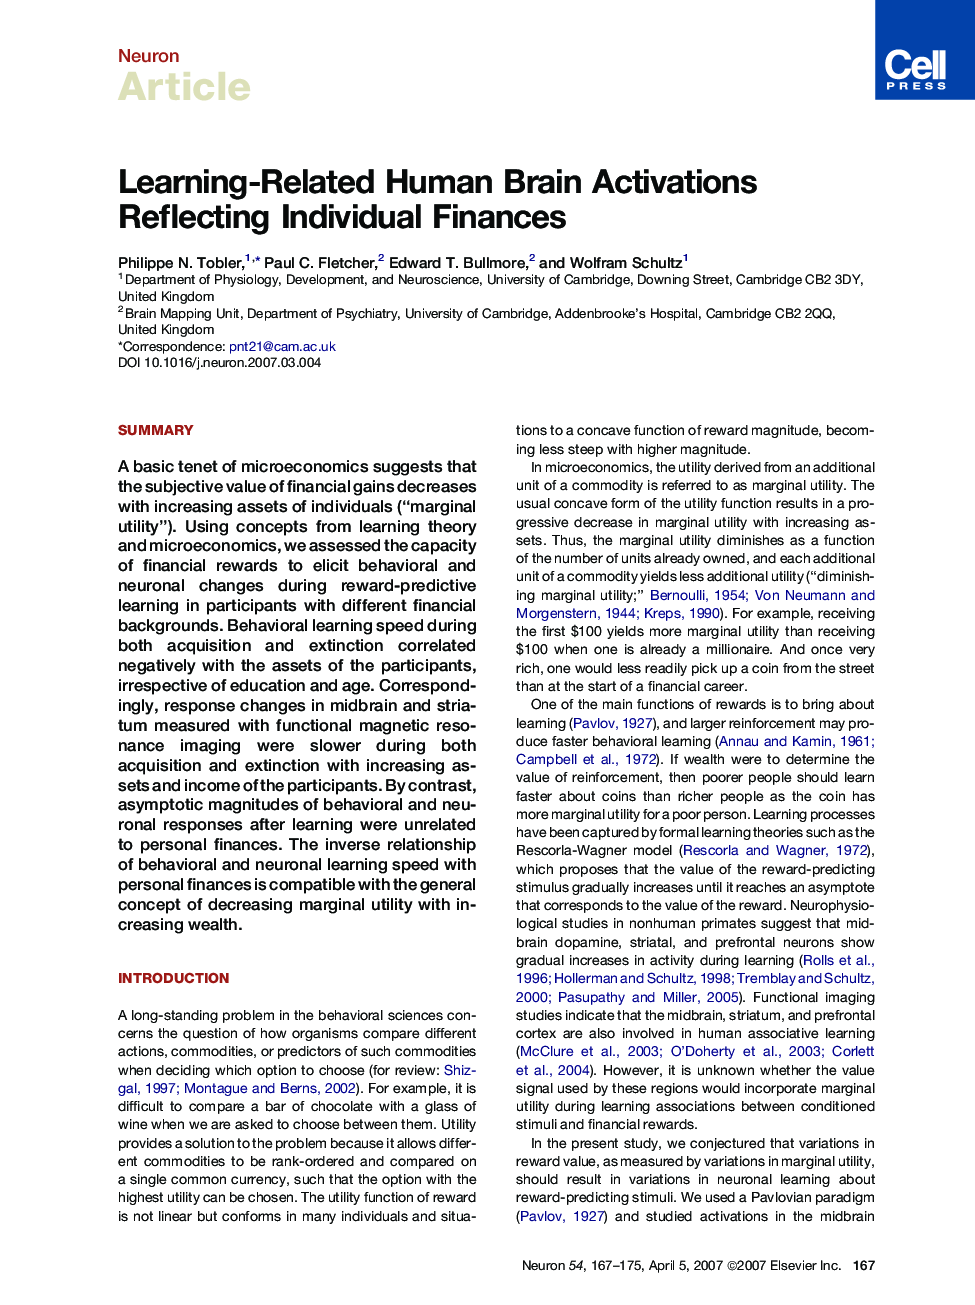 Learning-Related Human Brain Activations Reflecting Individual Finances